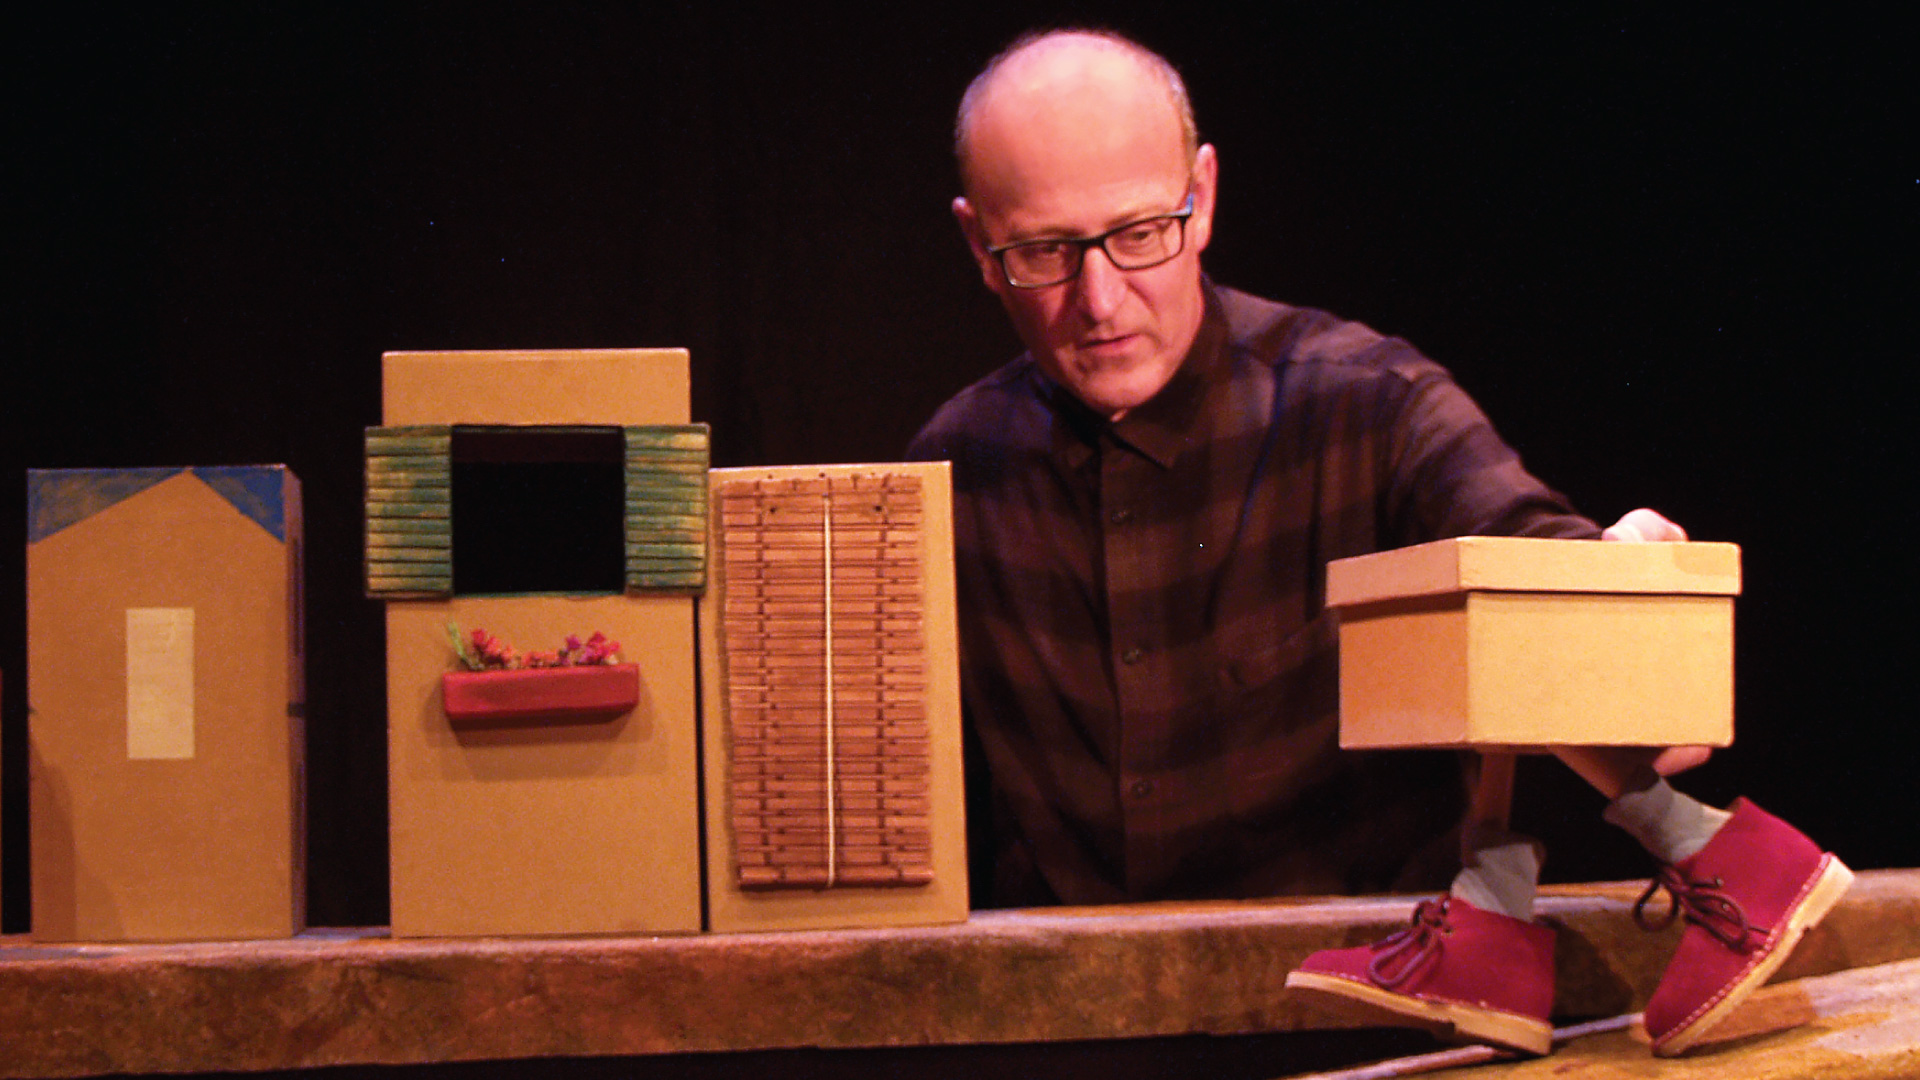 A man with glasses sitting next to three small, cardboard buildings puppeteers a small shoe box that has a pair of short legs, white socks and red shoes.